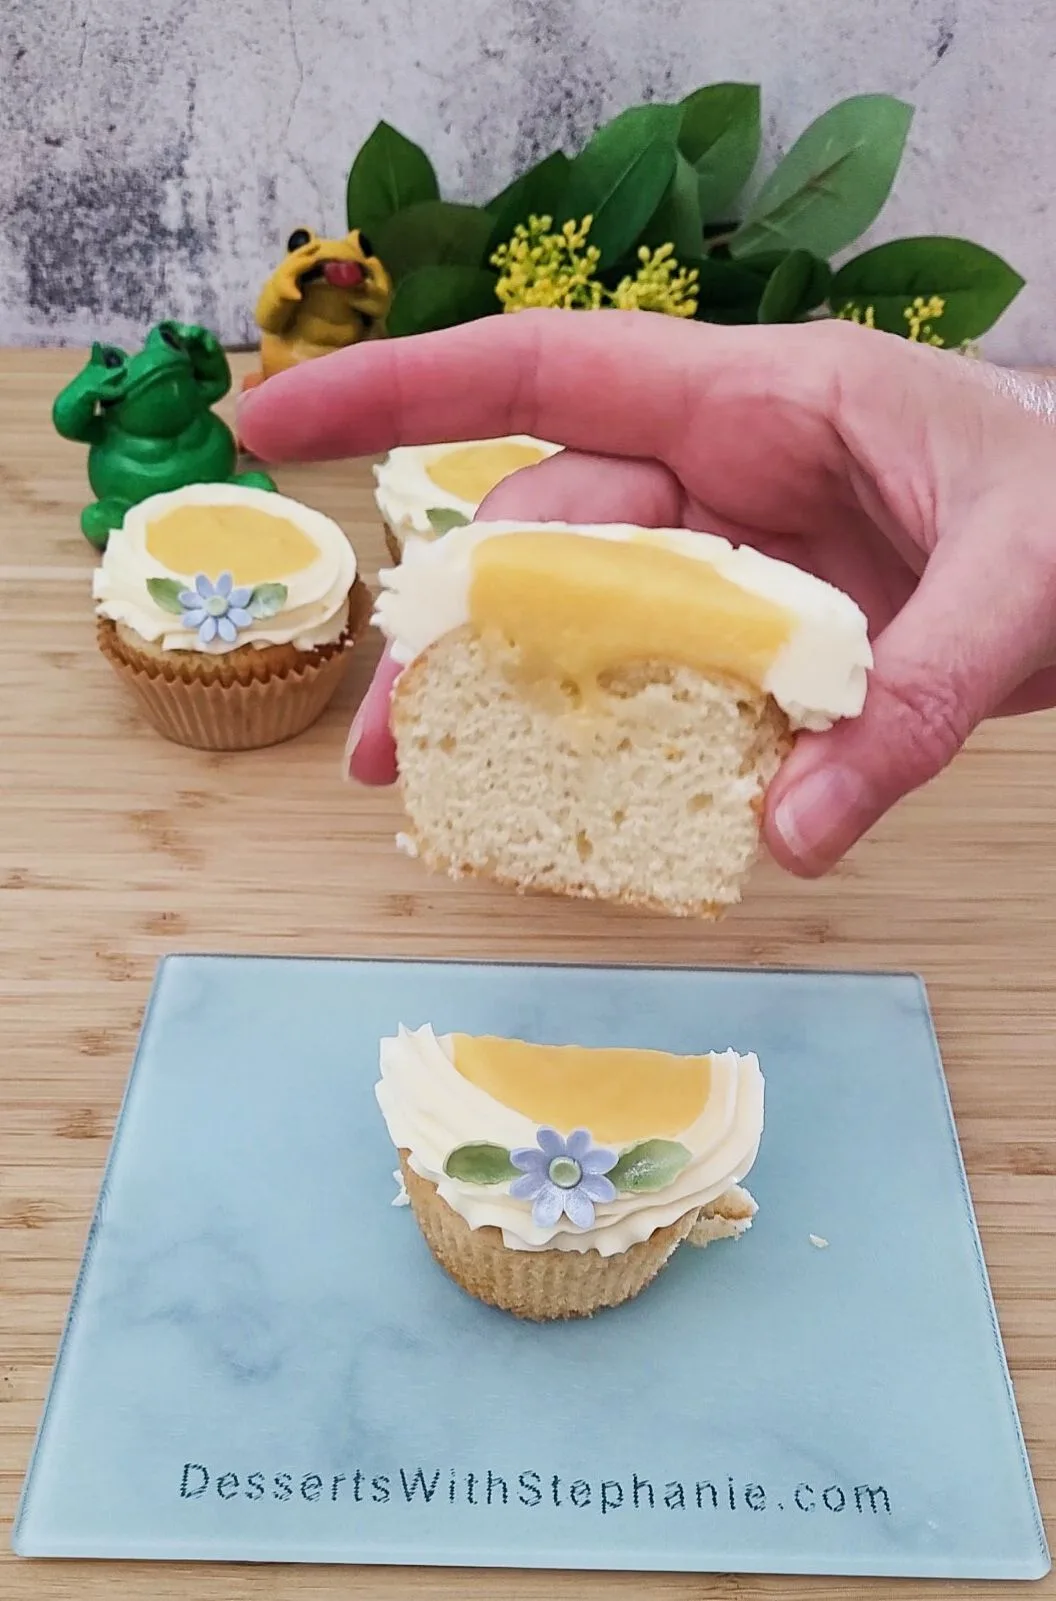 inside of cupcake with curd